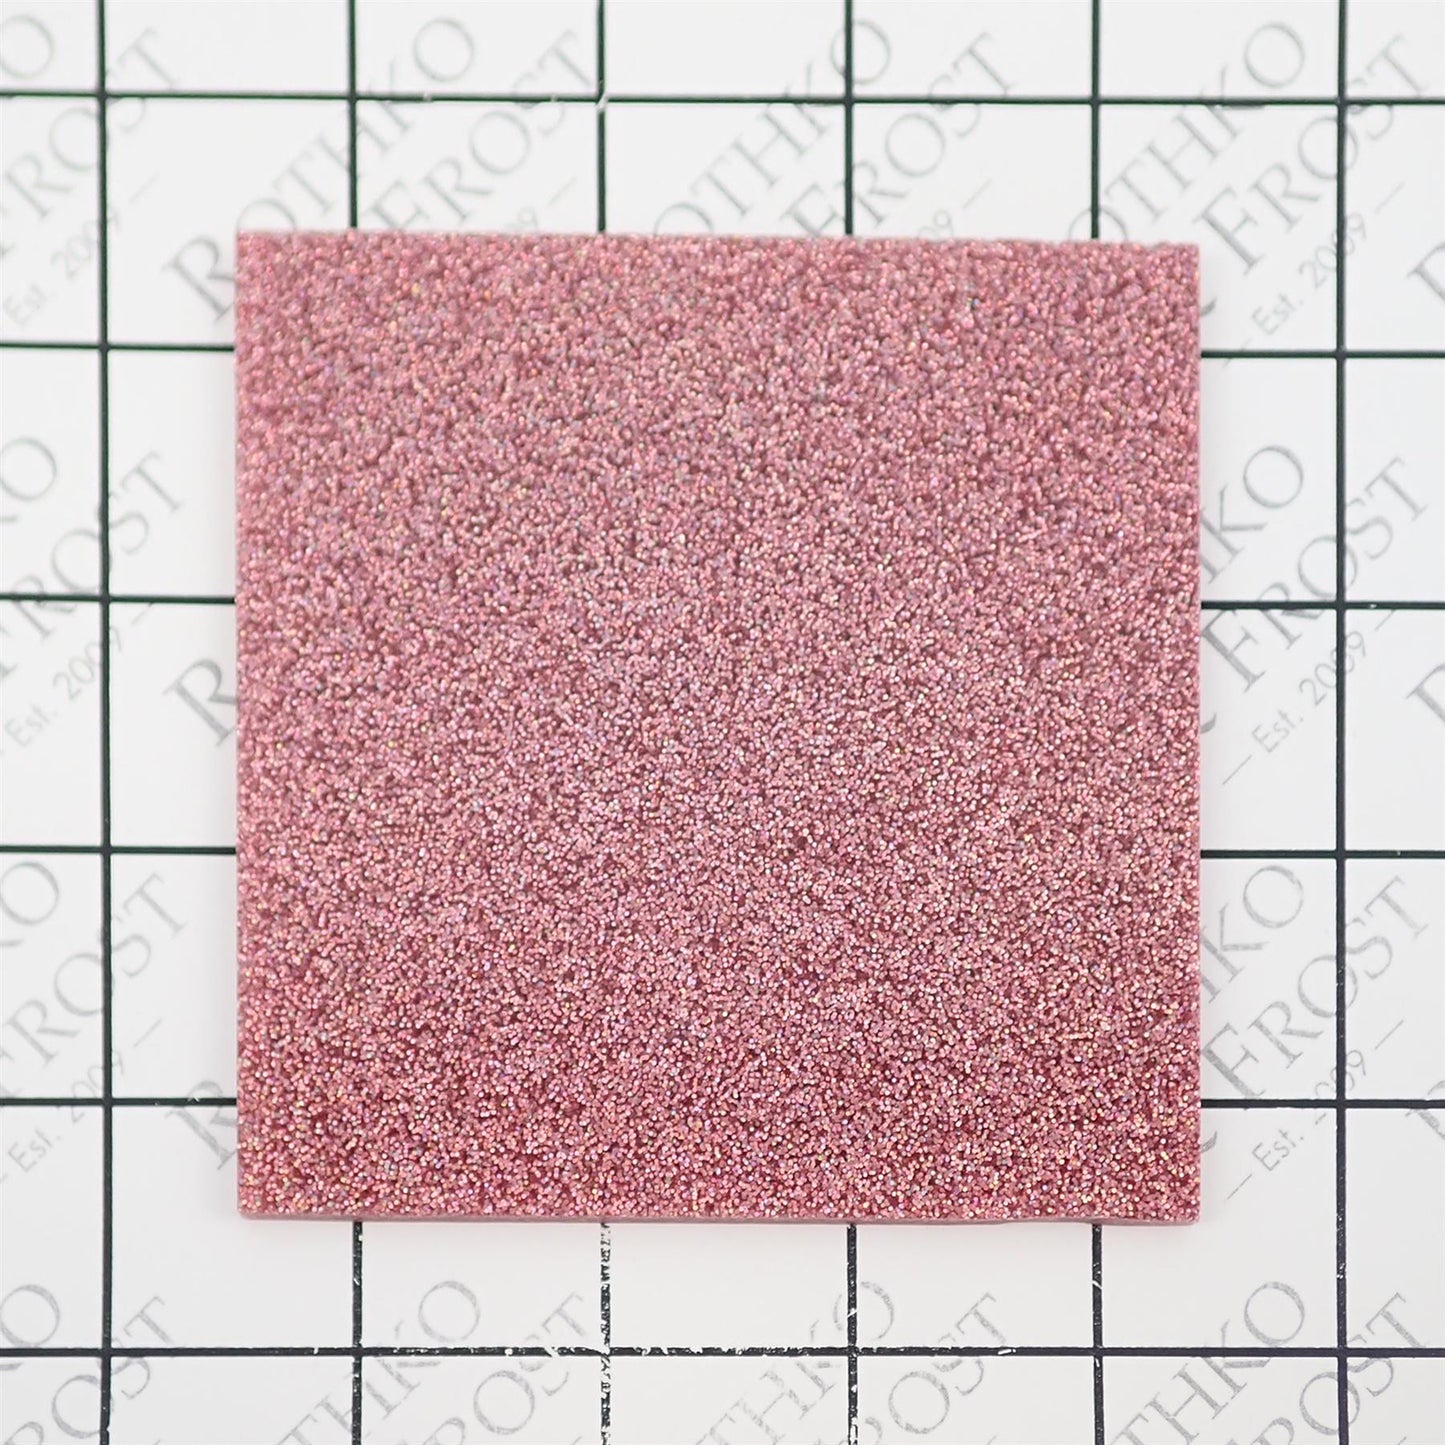 Incudo Golden Pink 2-Sided Holographic Glitter Acrylic Sheet - 400x300x3mm (15.7x11.81x0.12")